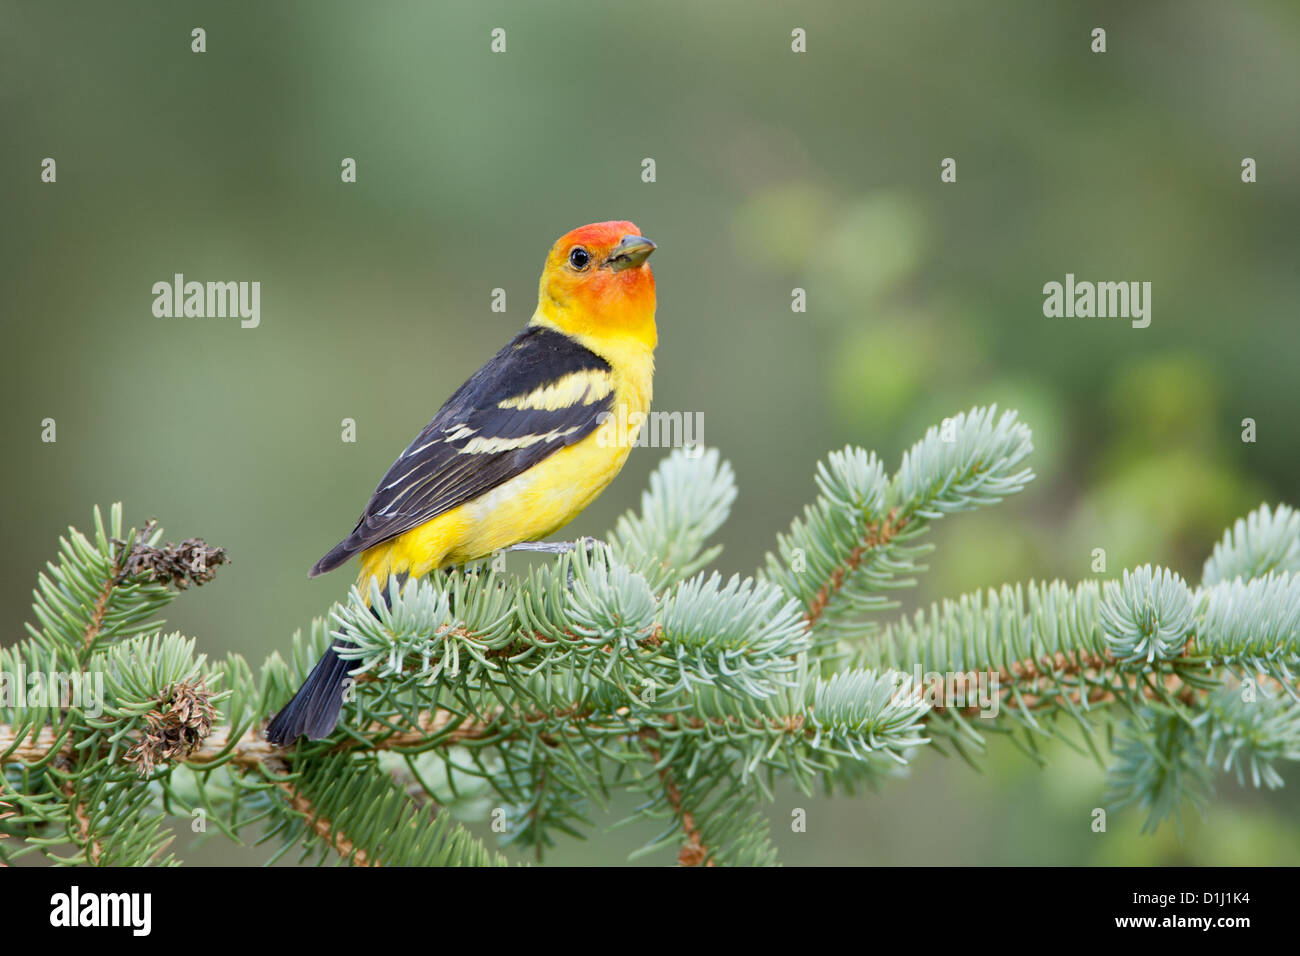 Western Tanager perched in Spruce birds bird songbird songbirds Ornithology Science Nature Wildlife Environment tanagers Stock Photo